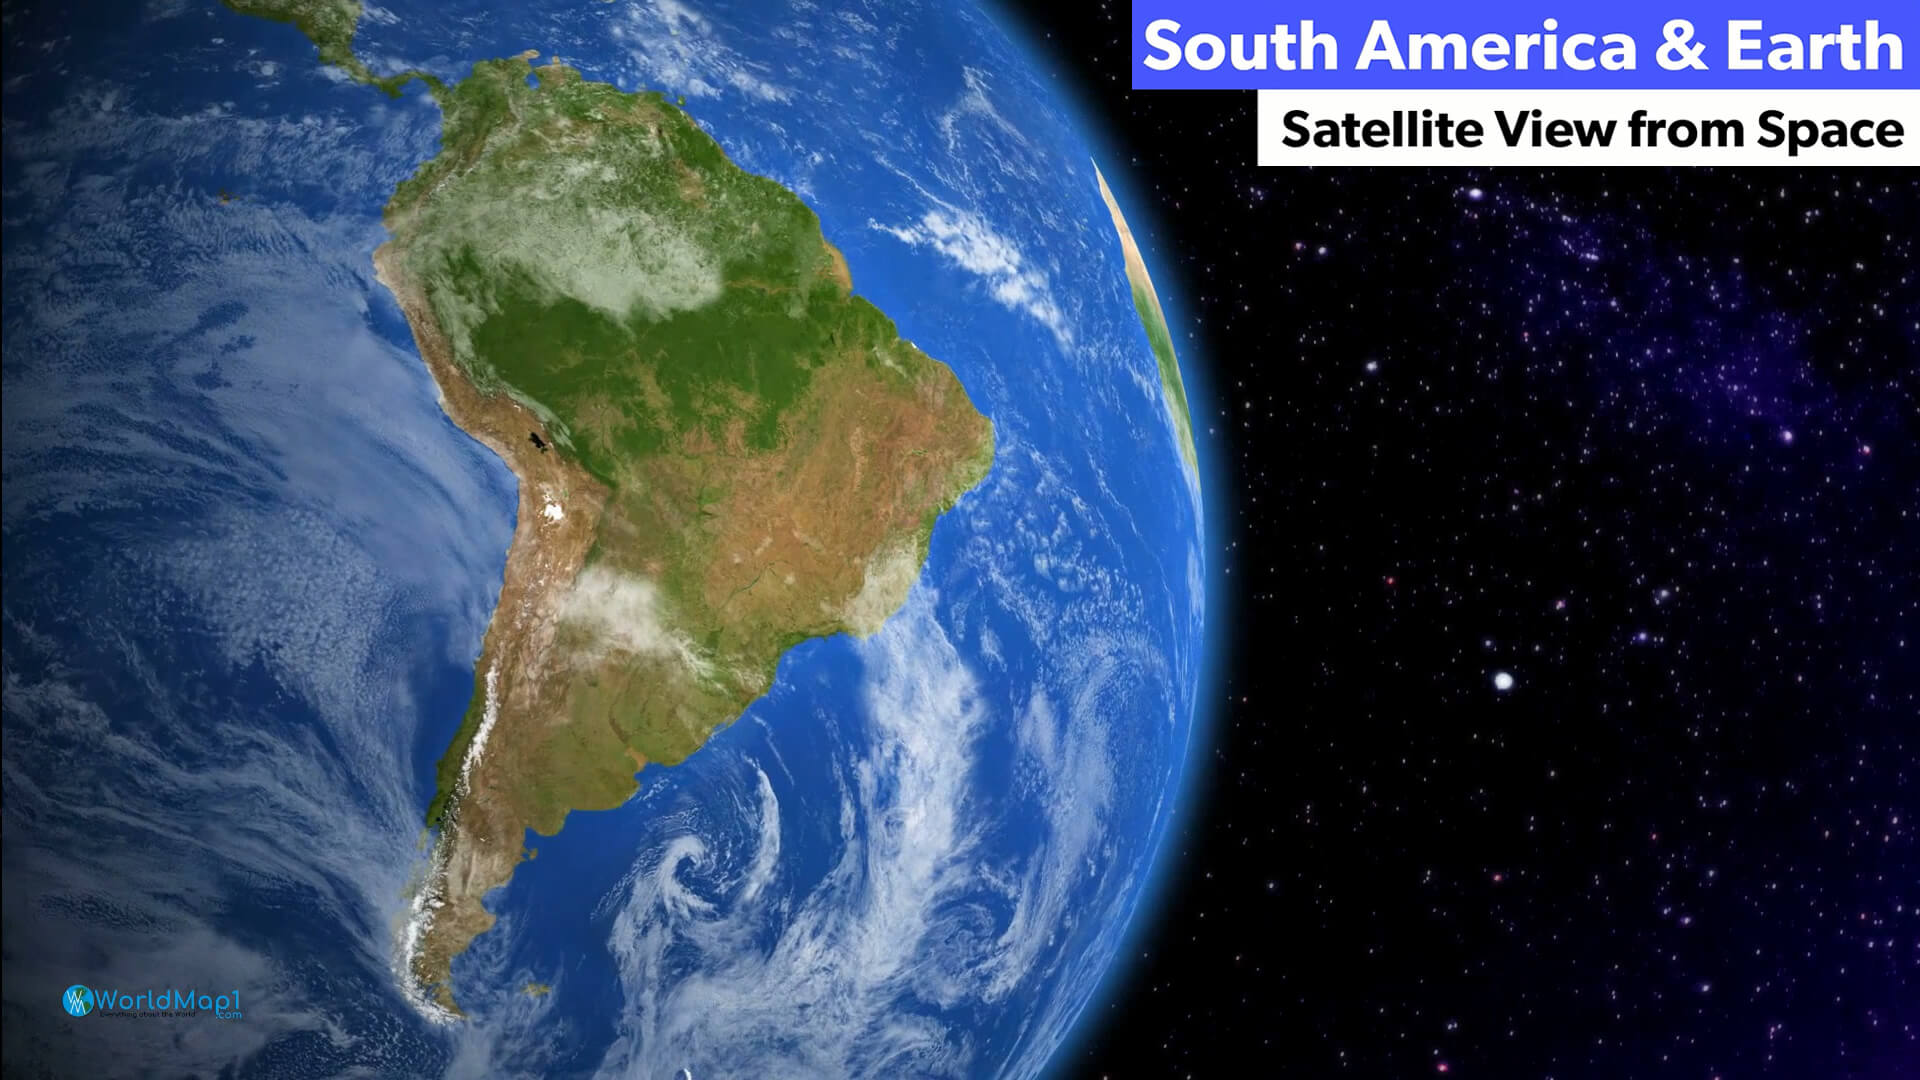 South America and Earth Satellite View from Space